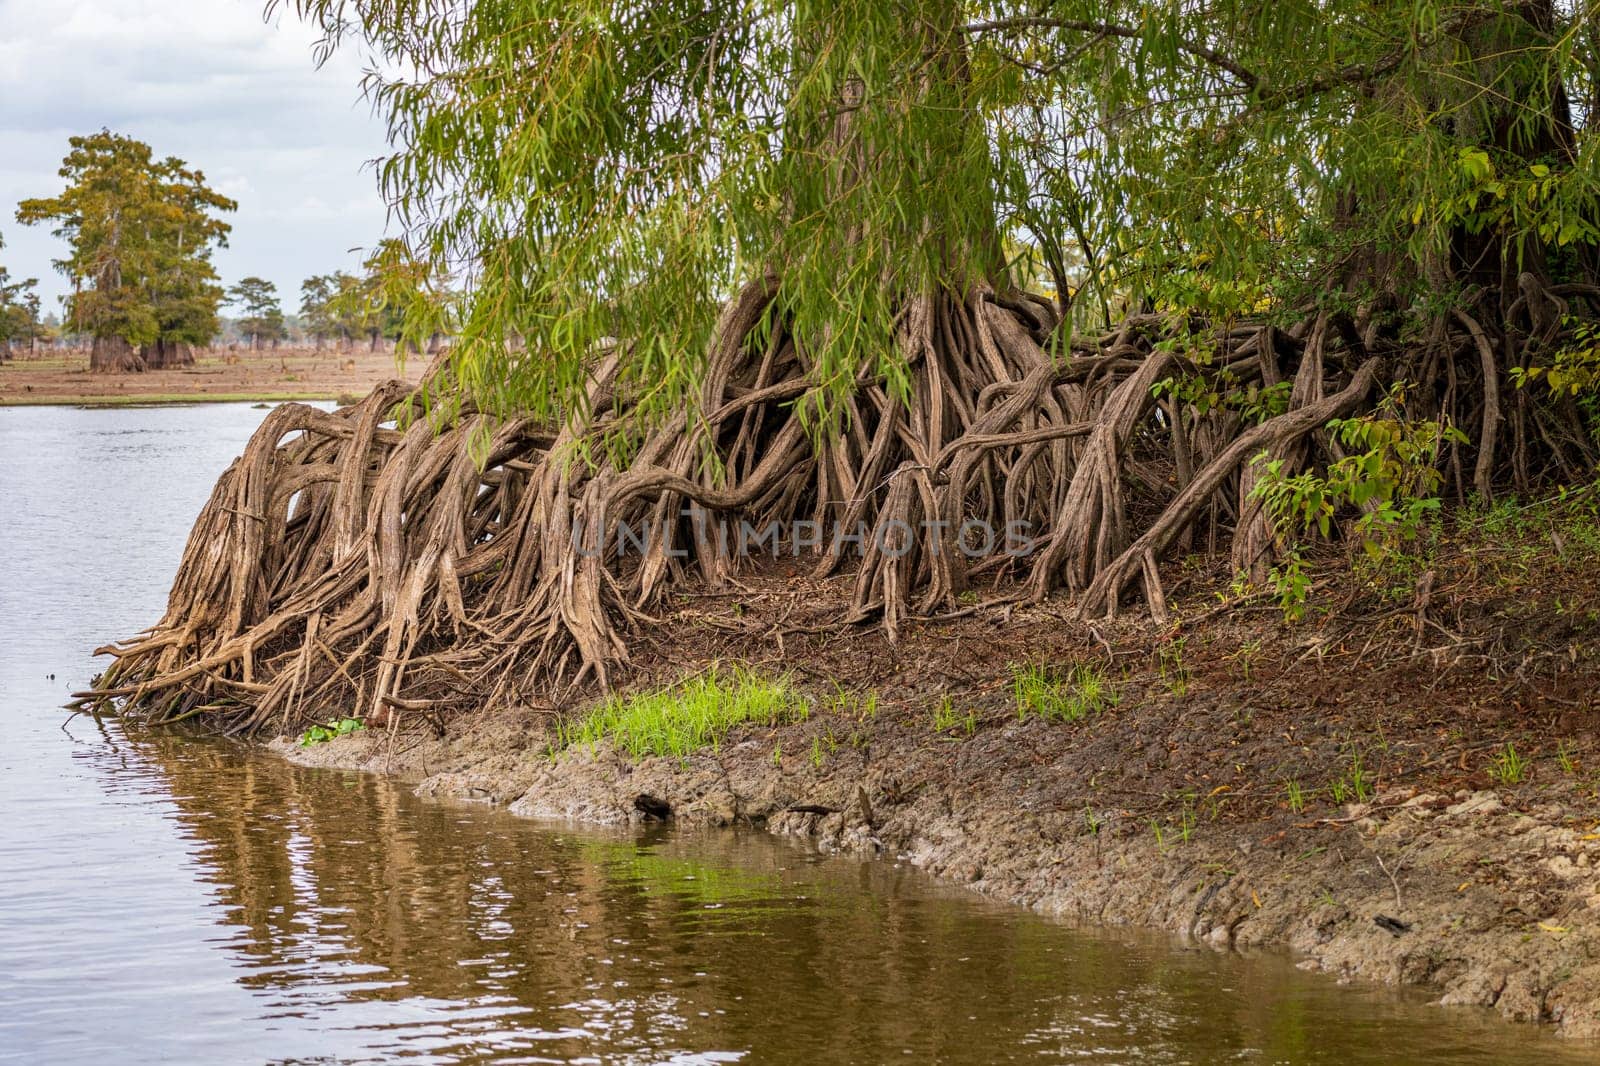 Roots and knees of bald cypress treeson the banks in calm waters of the bayou of Atchafalaya Basin near Baton Rouge Louisiana